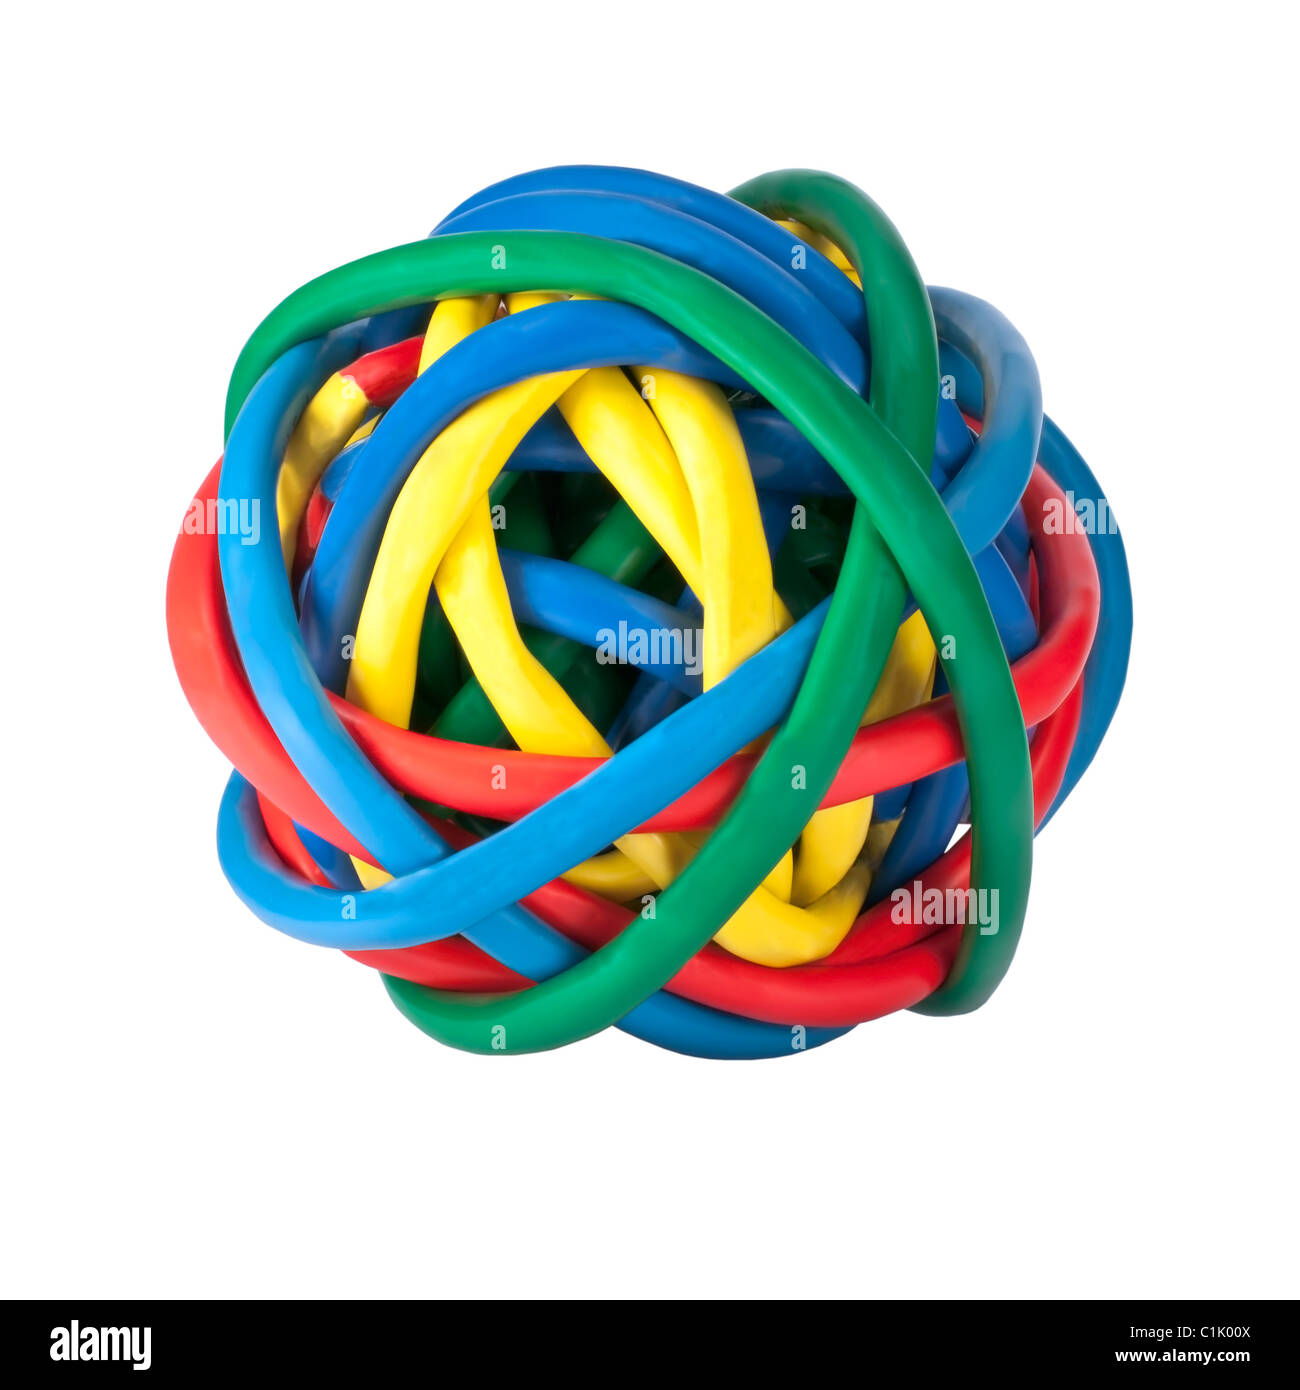 Ball of Colored Network Cables Isolated on White Stock Photo